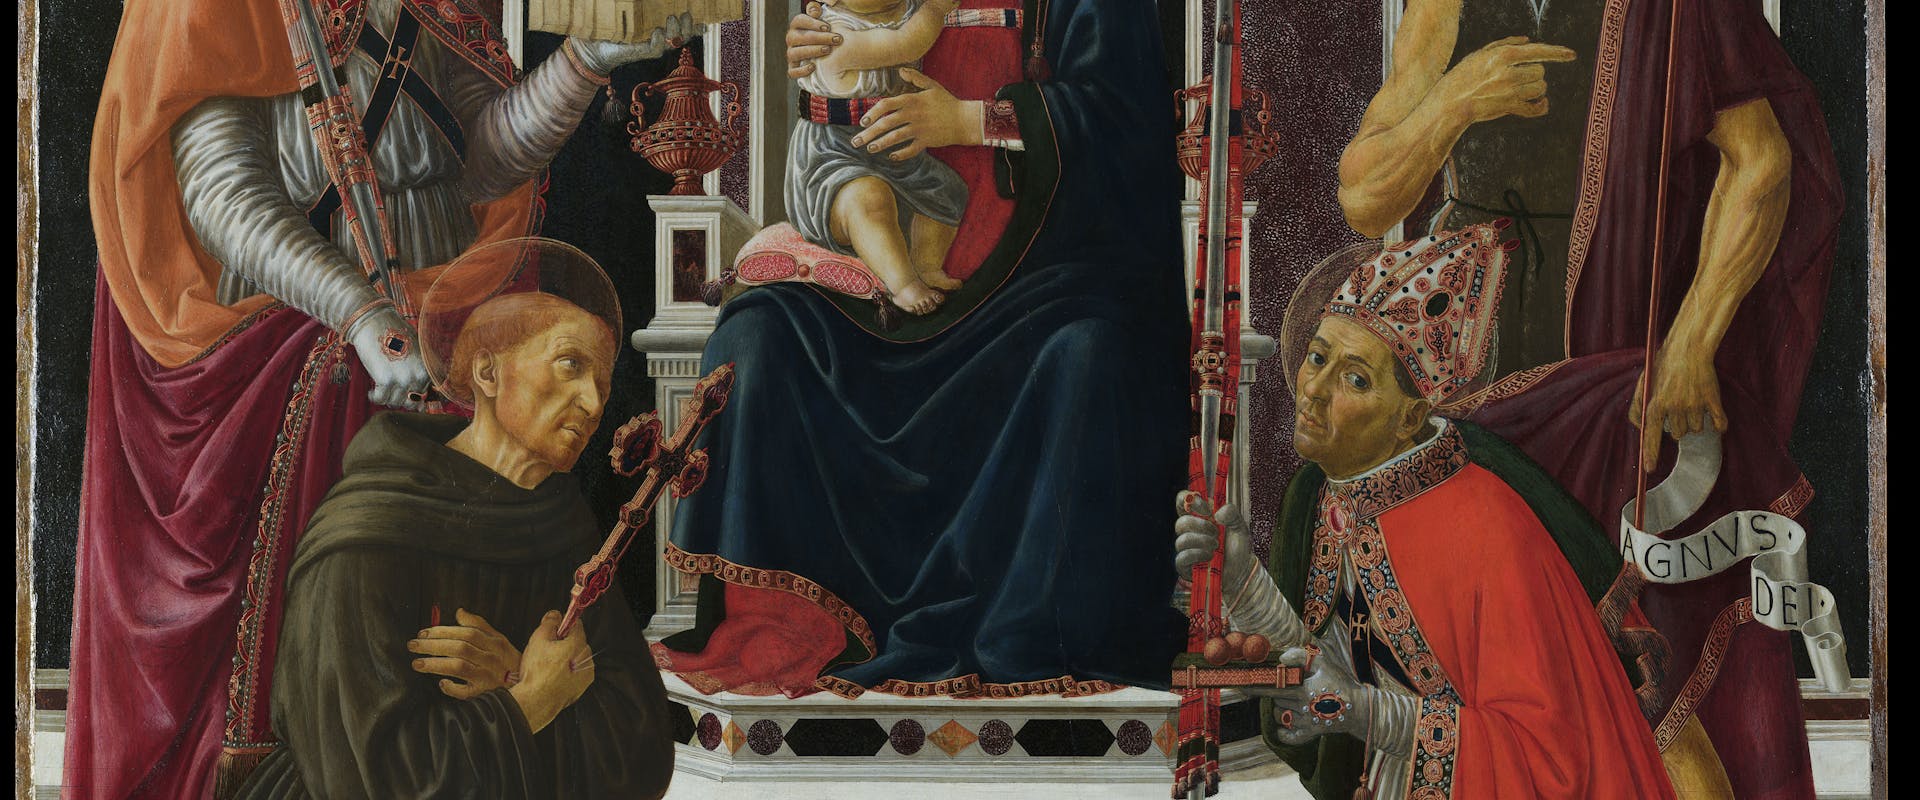 Verrocchio and his world in one of his lesser known works: the Macinghi Altarpiece restored